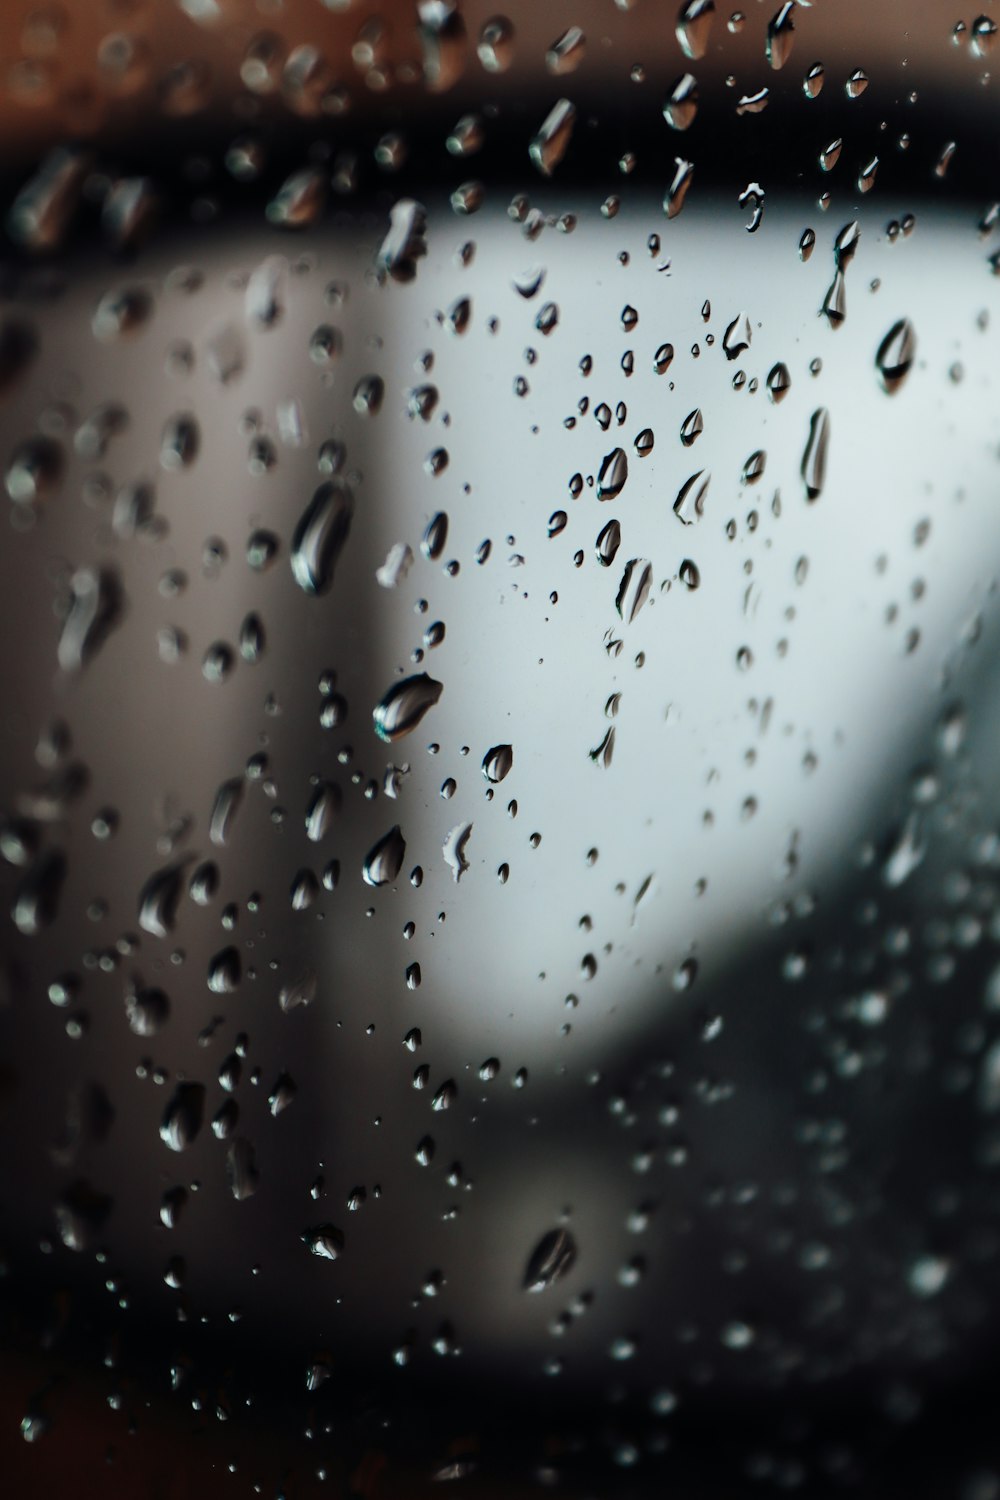 100+ Tears Pictures  Download Free Images on Unsplash